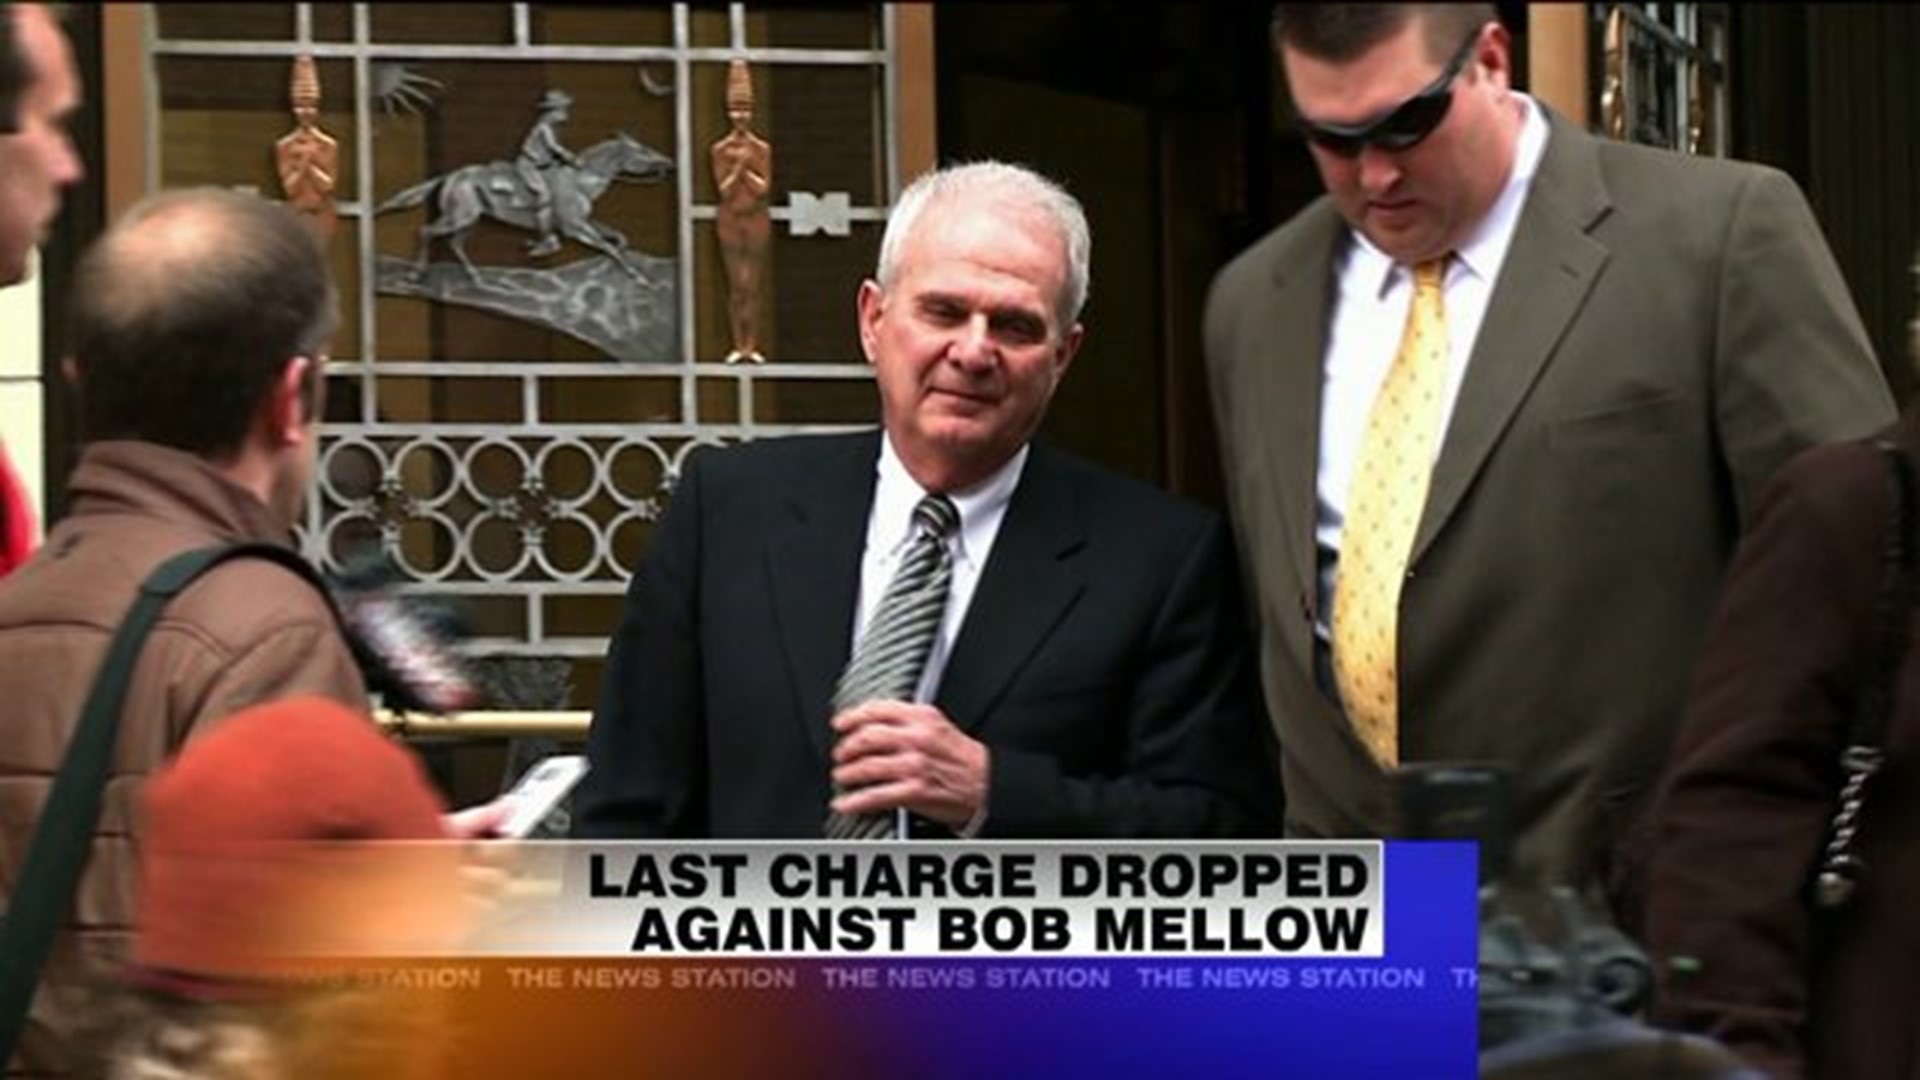 Remaining Charge Against Mellow Withdrawn